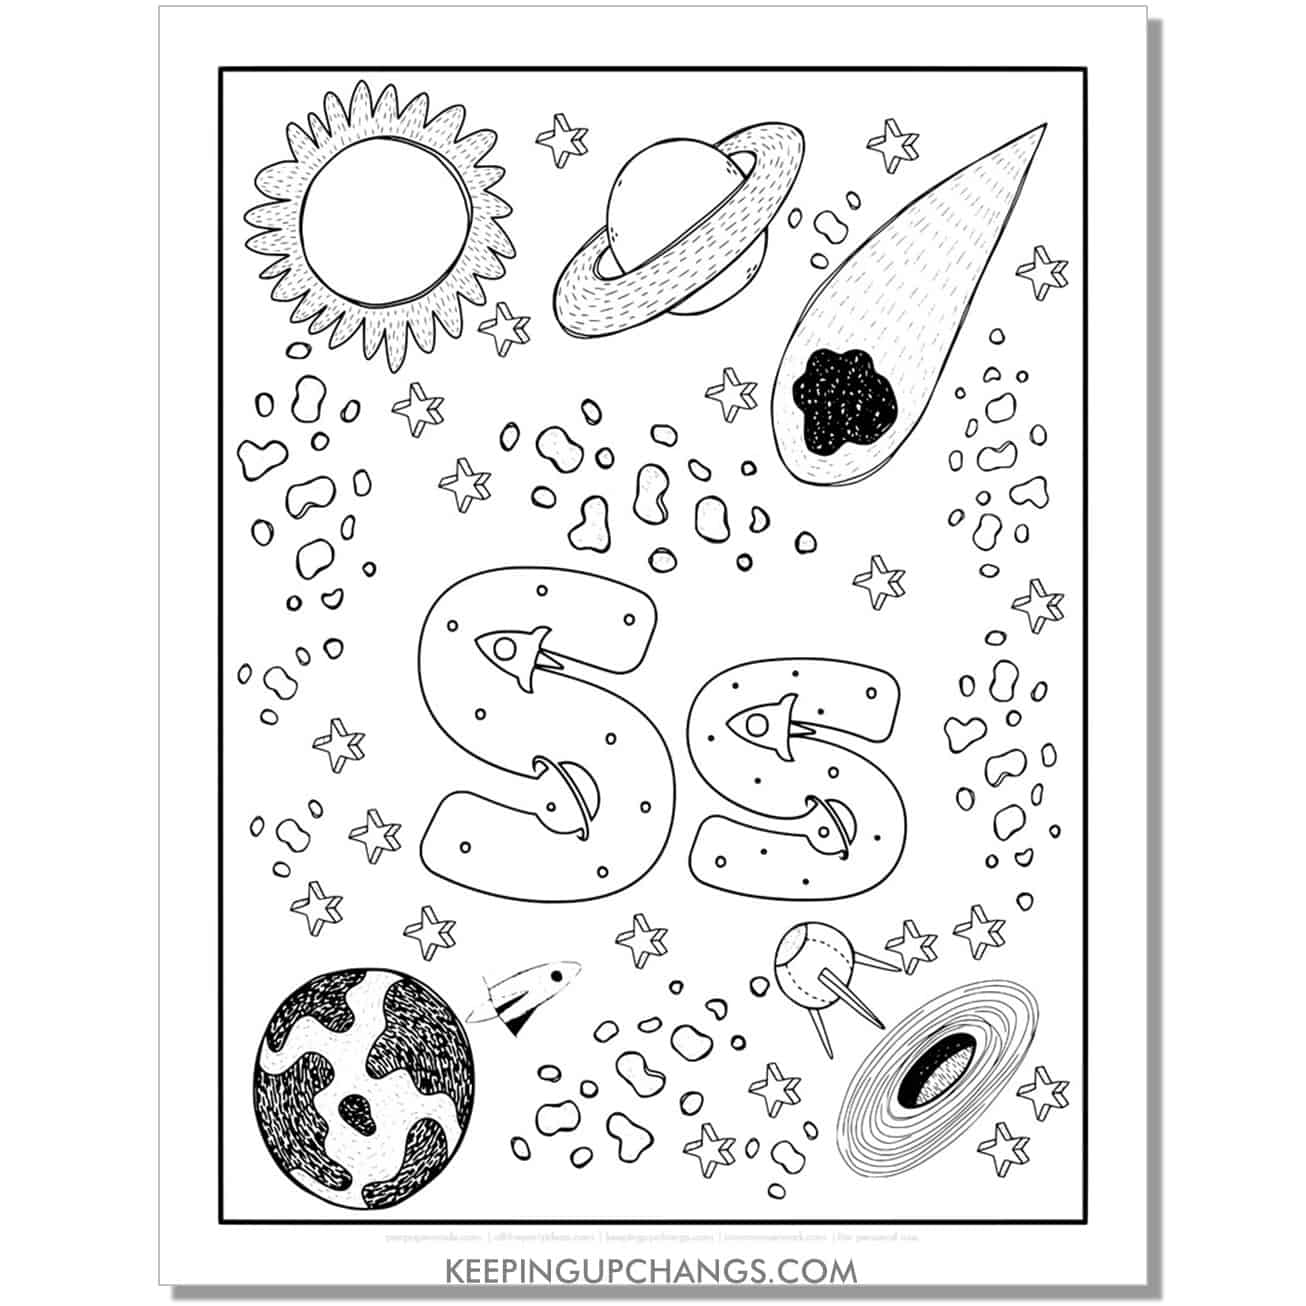 free alphabet letter s coloring page for kids with rockets, space theme.